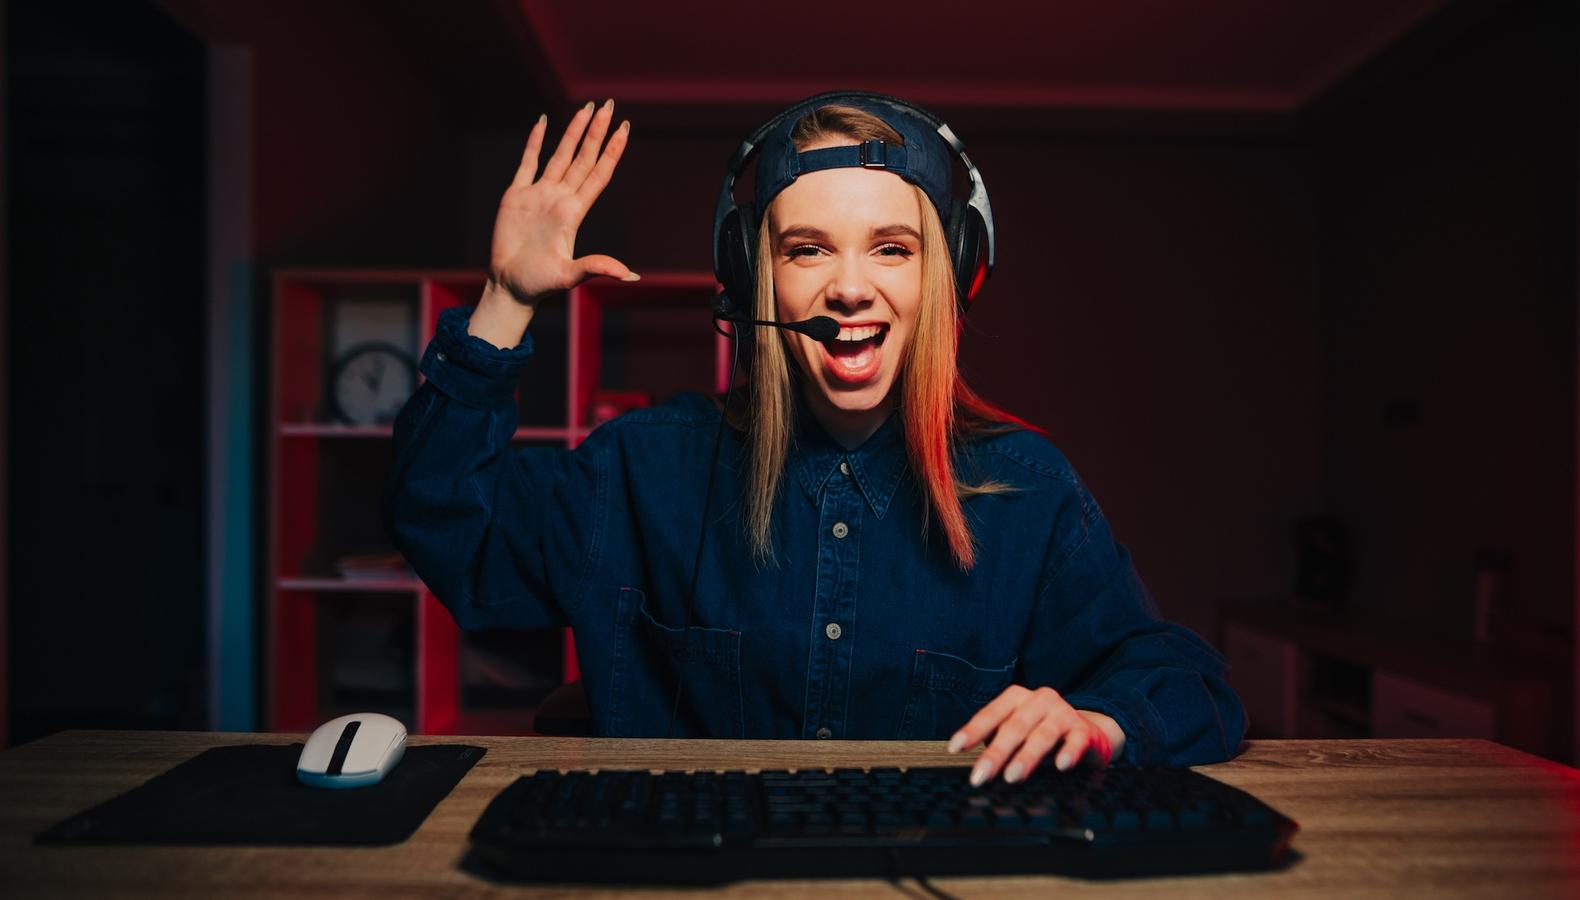 How to Build an Audience on Twitch & Market Your Brand